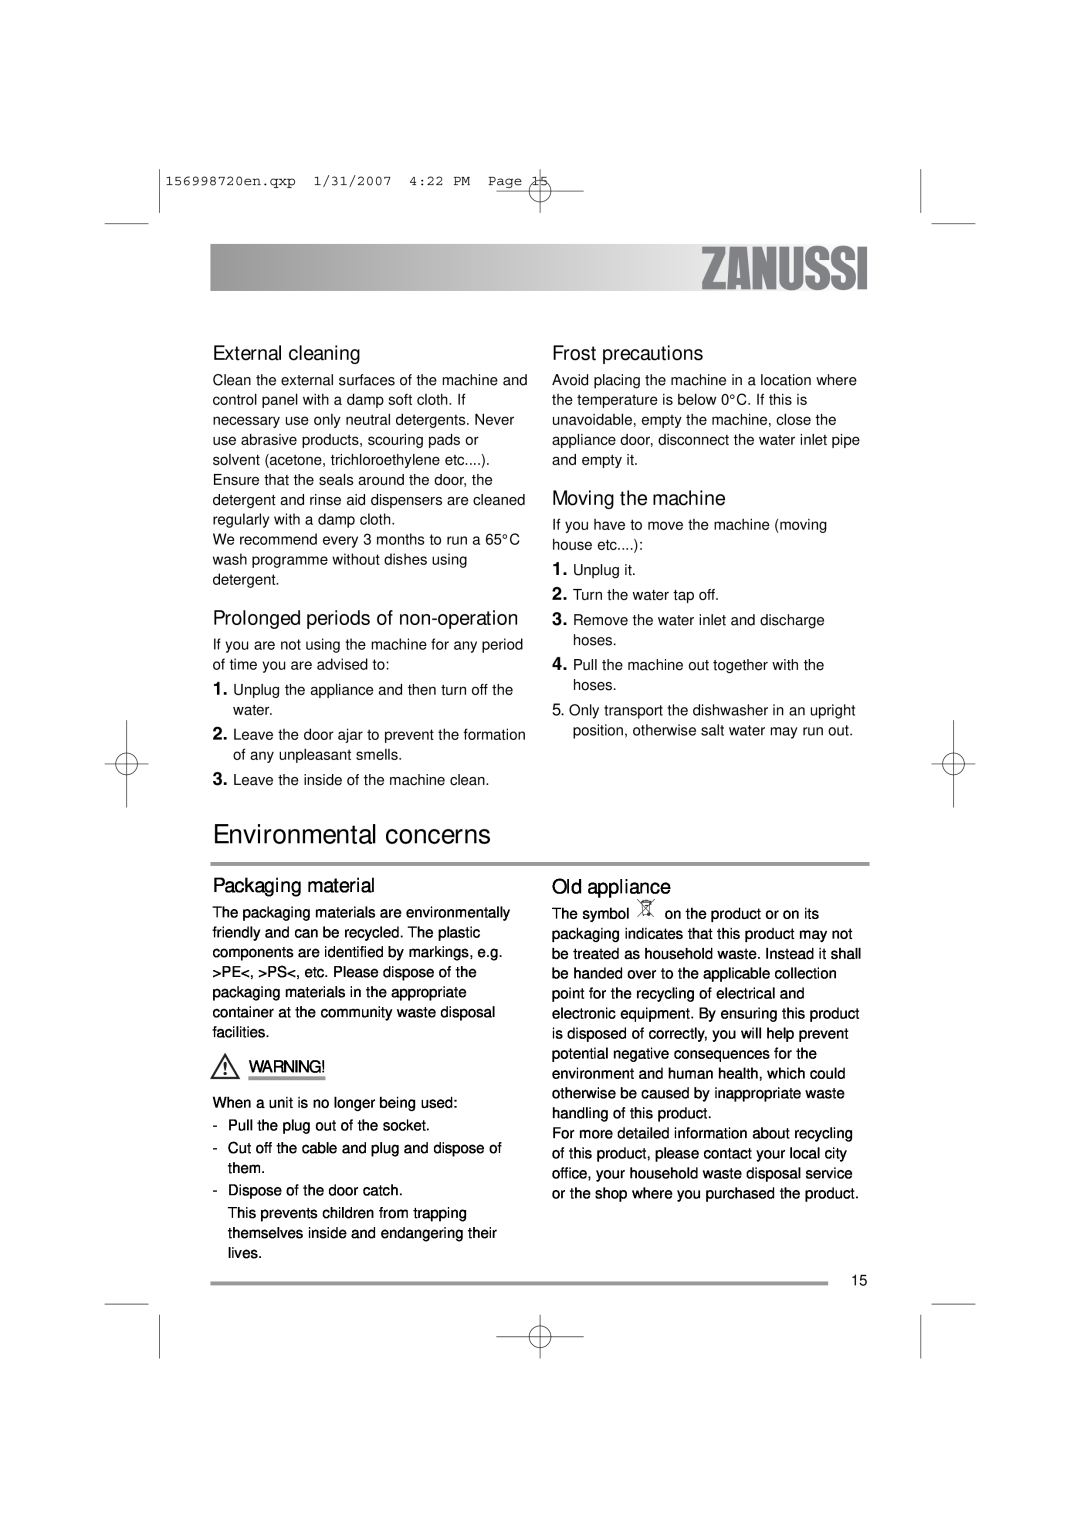 Zanussi ZDI 100 manual Environmental concerns, External cleaning, Frost precautions, Moving the machine, Packaging material 